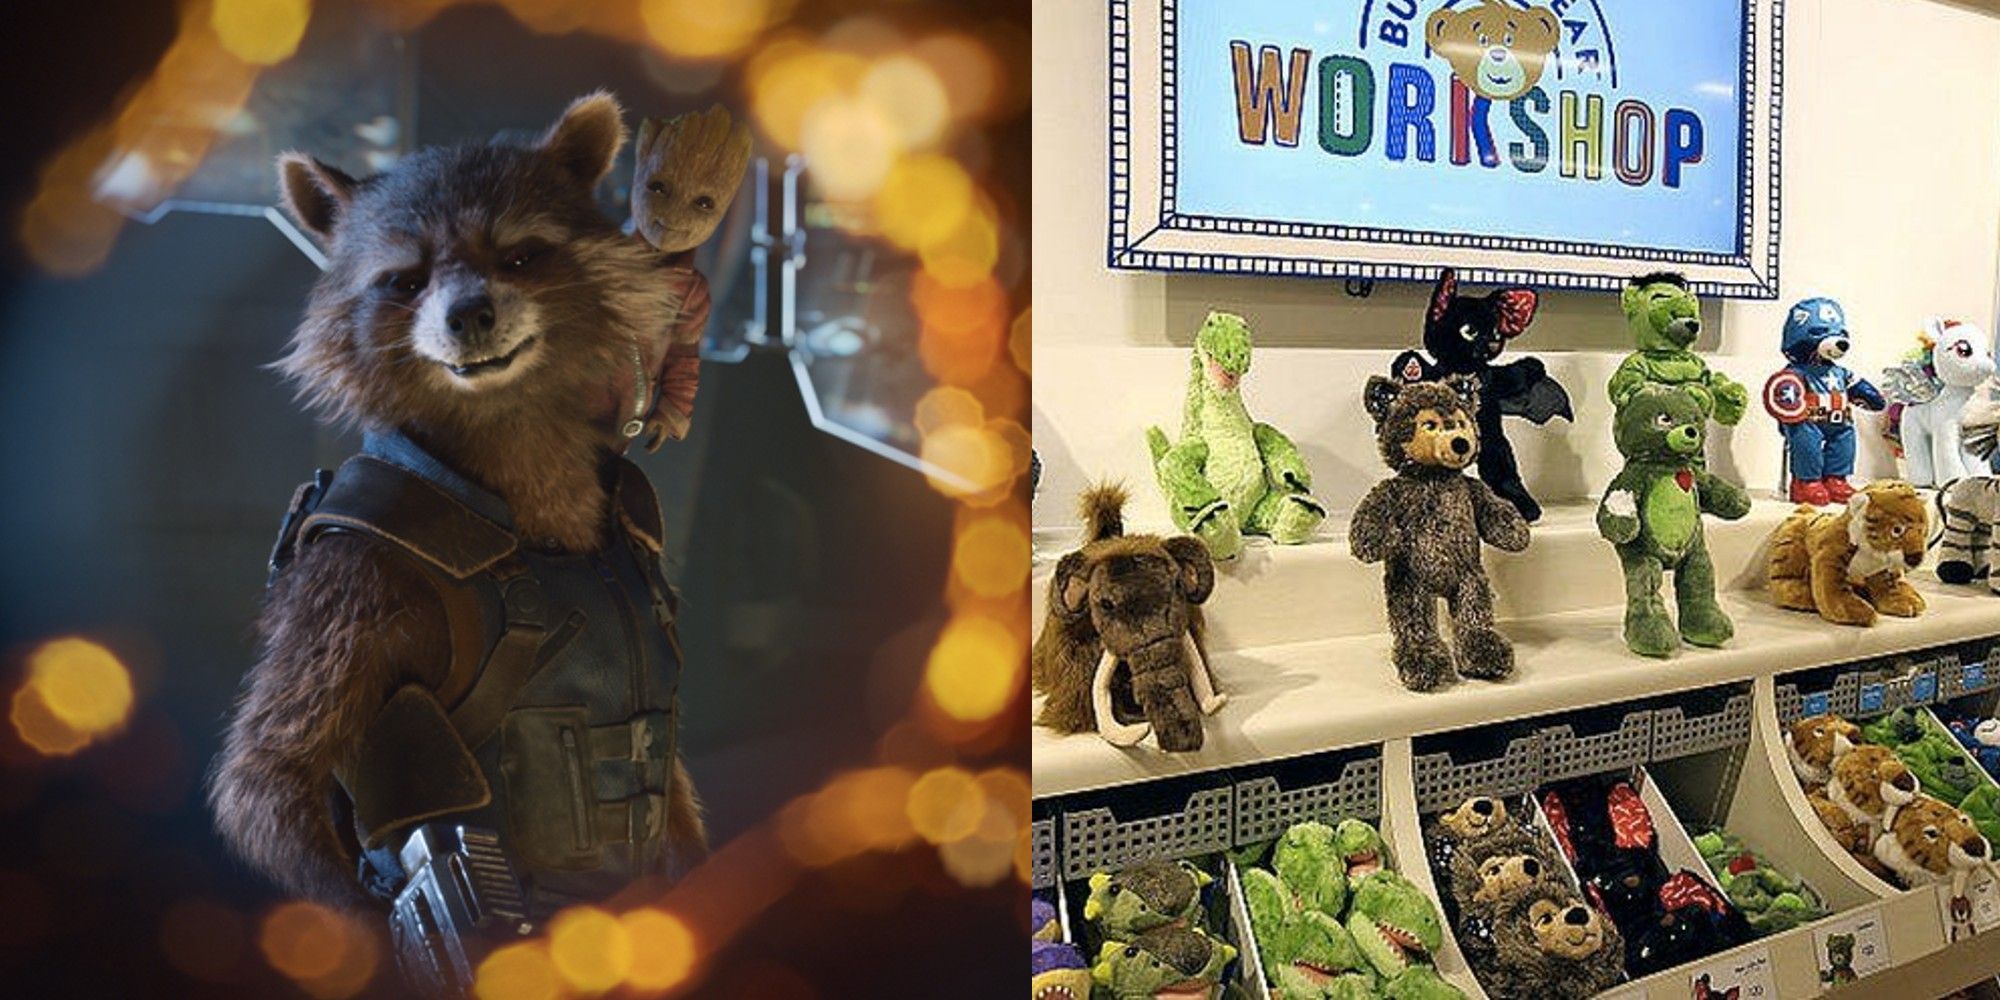 Left to right: Rocket Racoon in Guardians of the Galaxy and the Build-A-Bear Workshop plushies